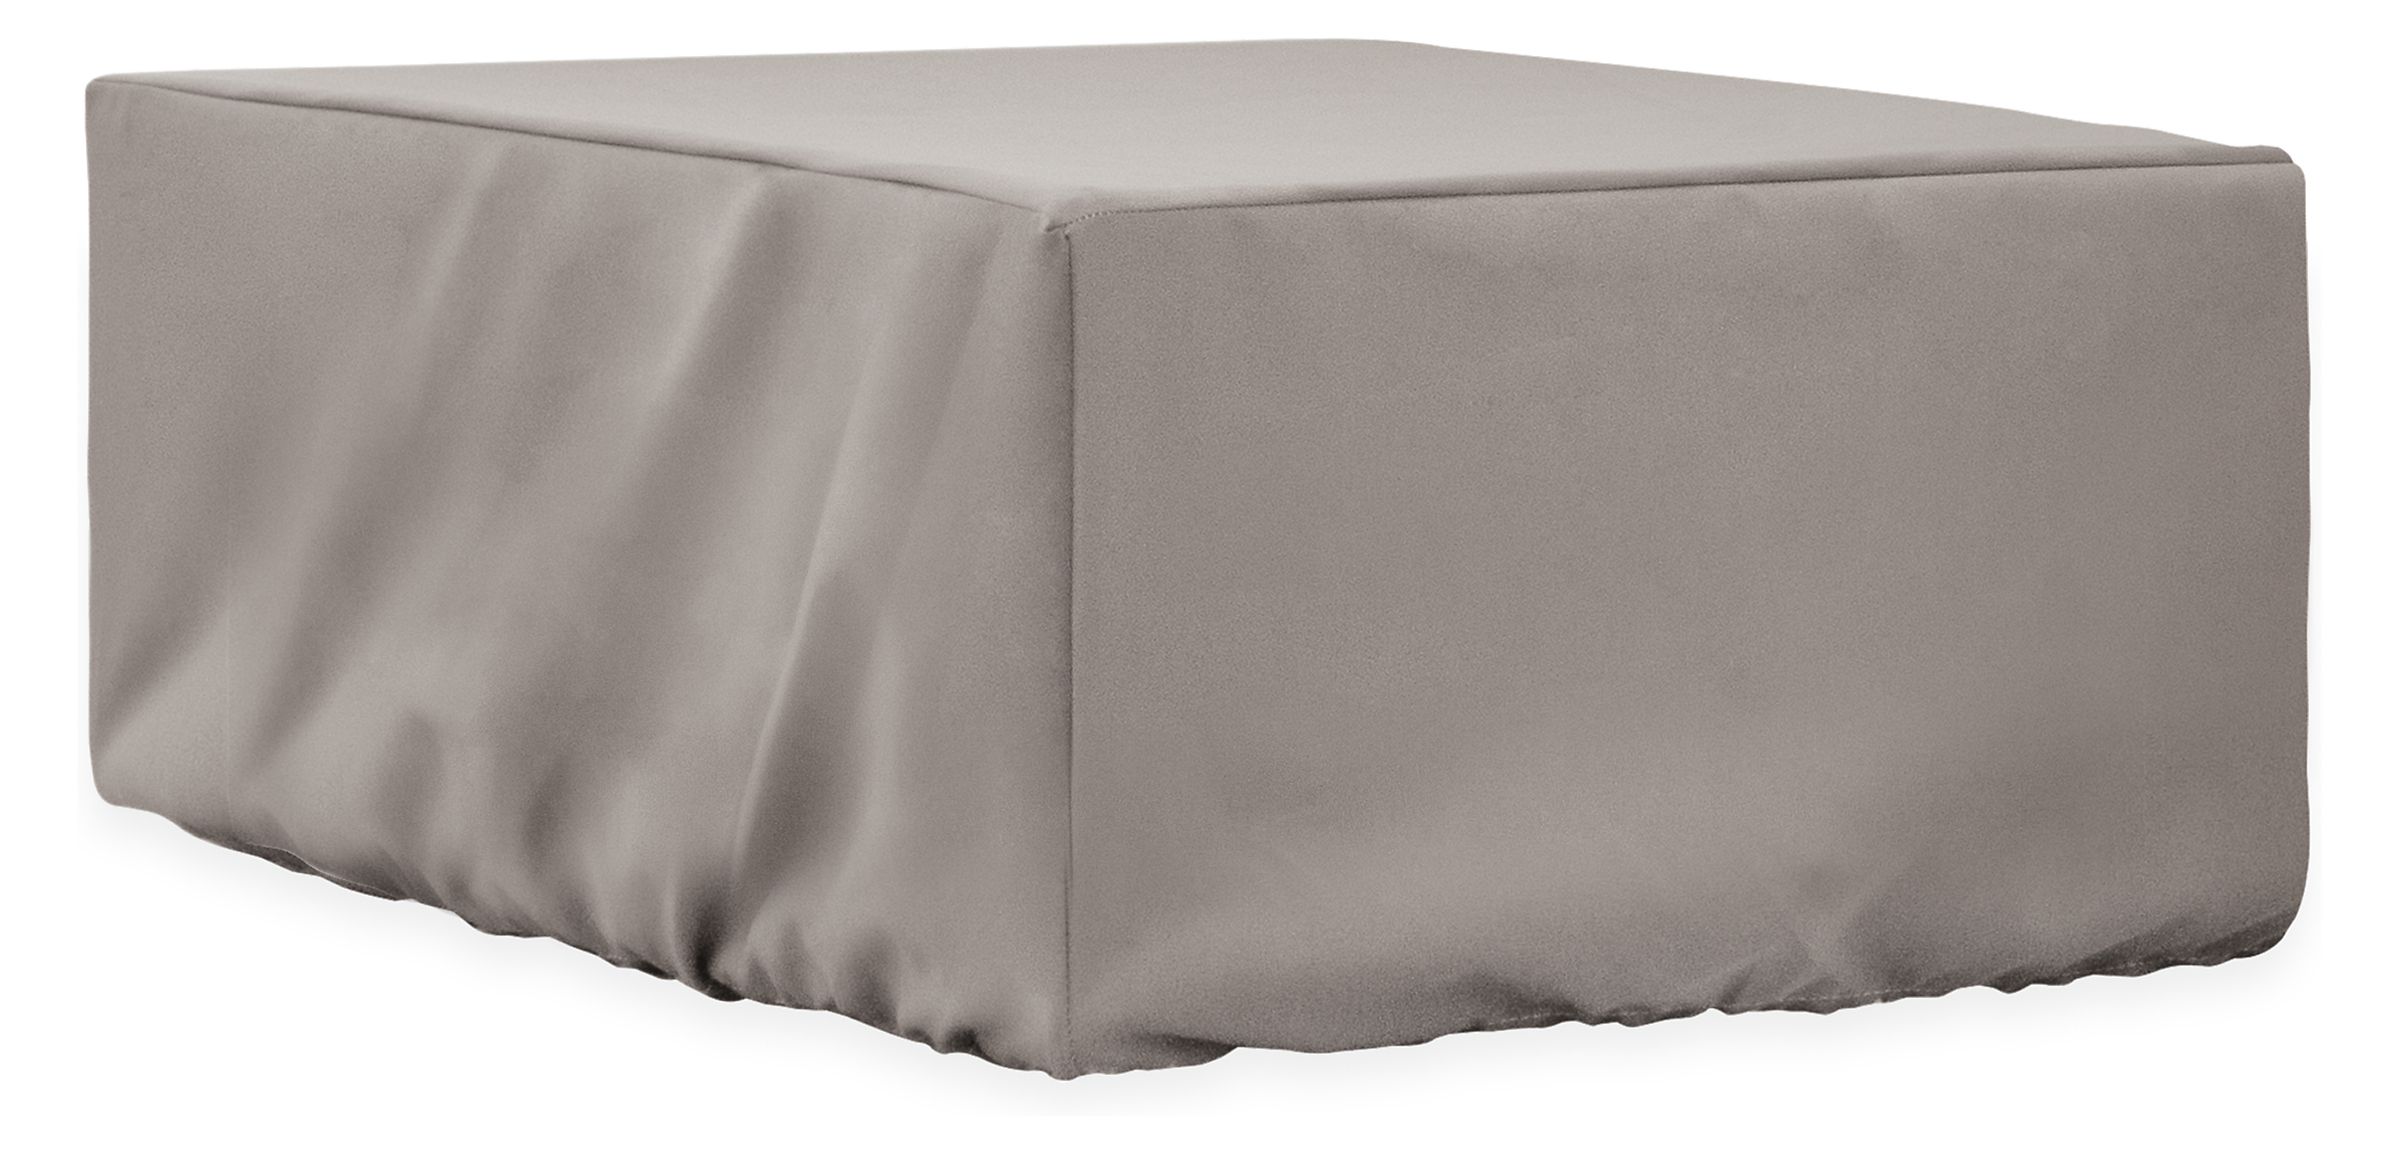 Outdoor Cover for Table/Ottoman 41w 39d 19h with Drawstring